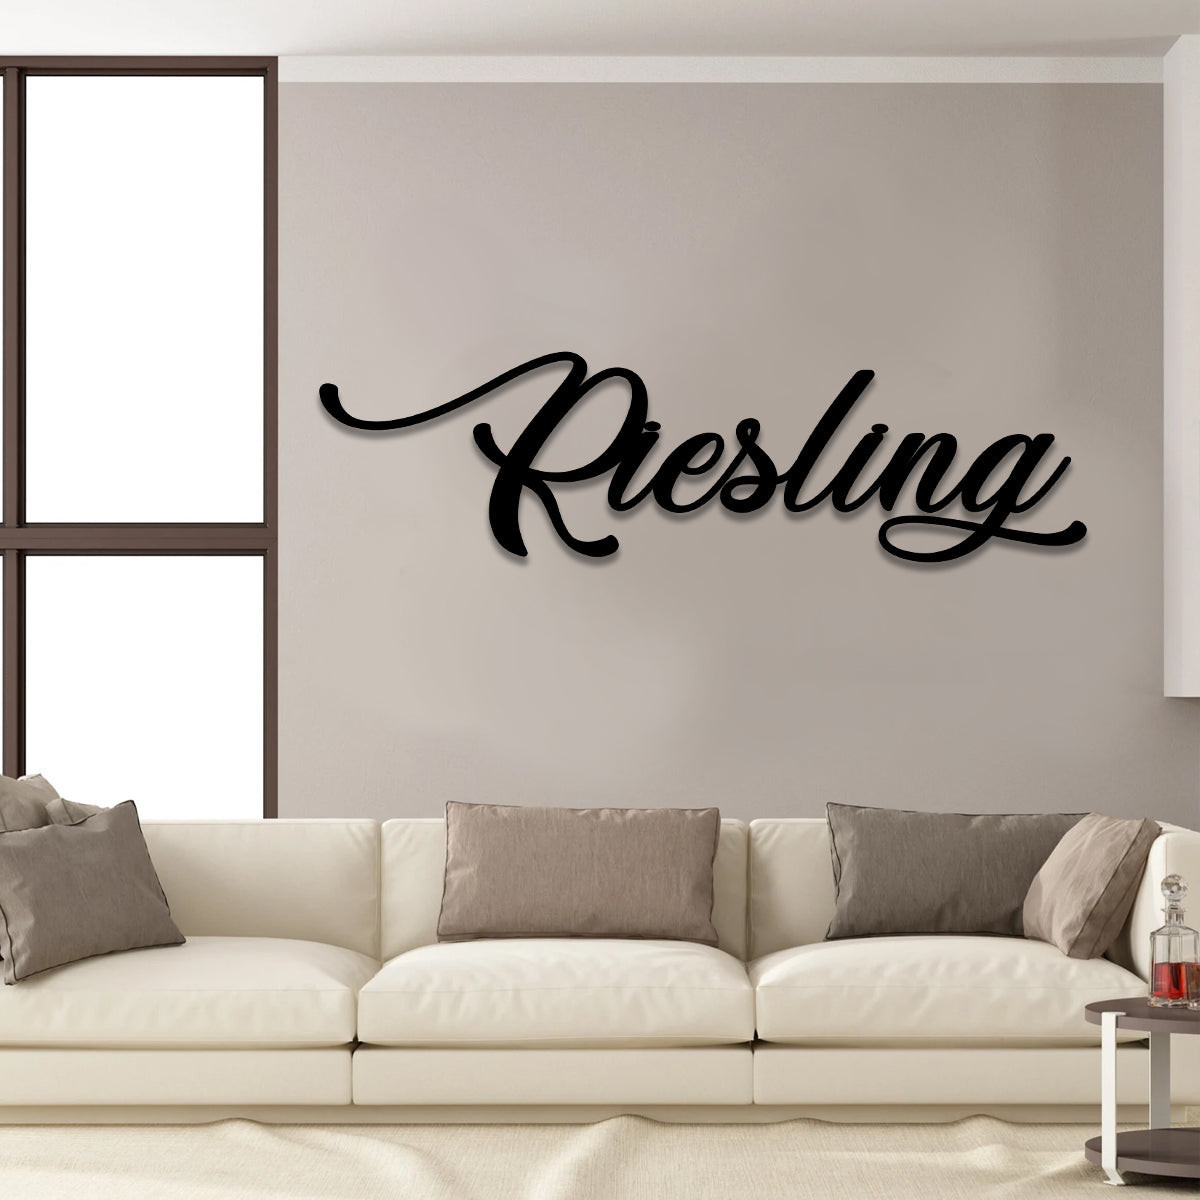 Riesling Wine Metal Bar Sign, Pub, Tap, Wall Decor, Wedding Art Gift For Him/her, Metal Laser Cut Metal Signs Custom Gift Ideas 12x12IN